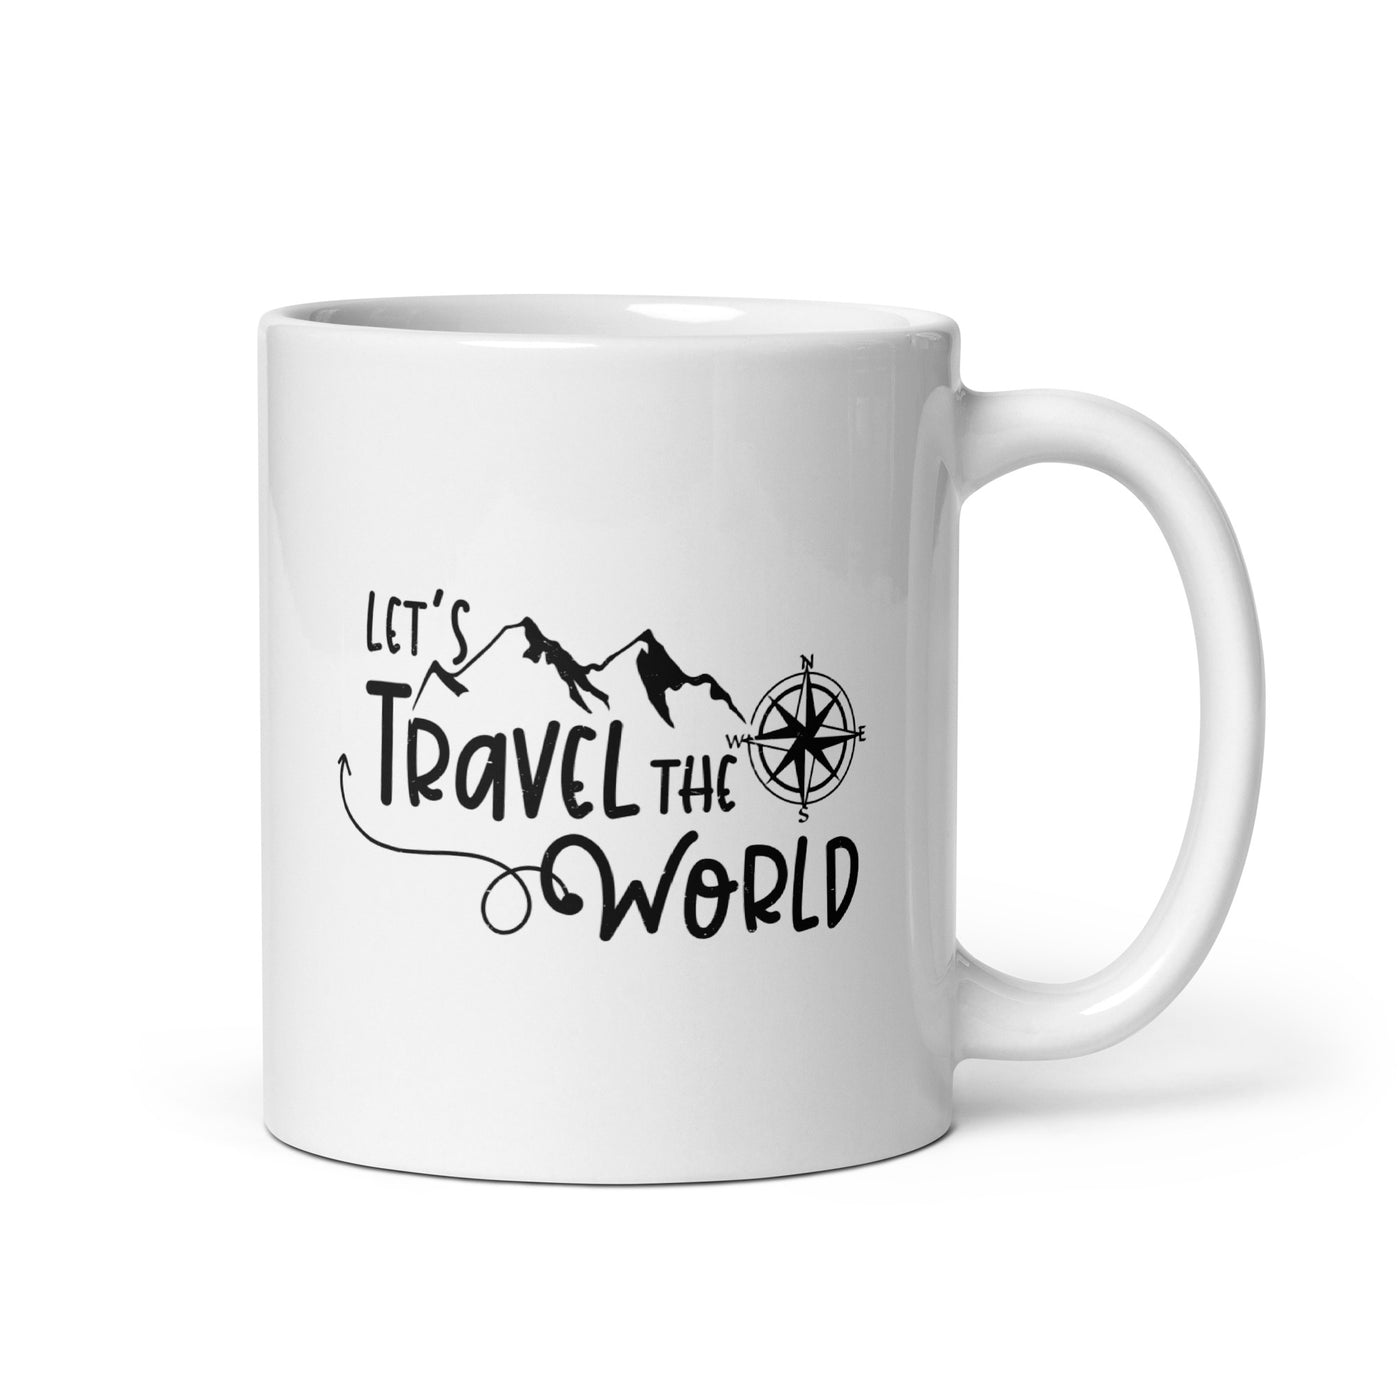 Lets Travel The World - Tasse camping